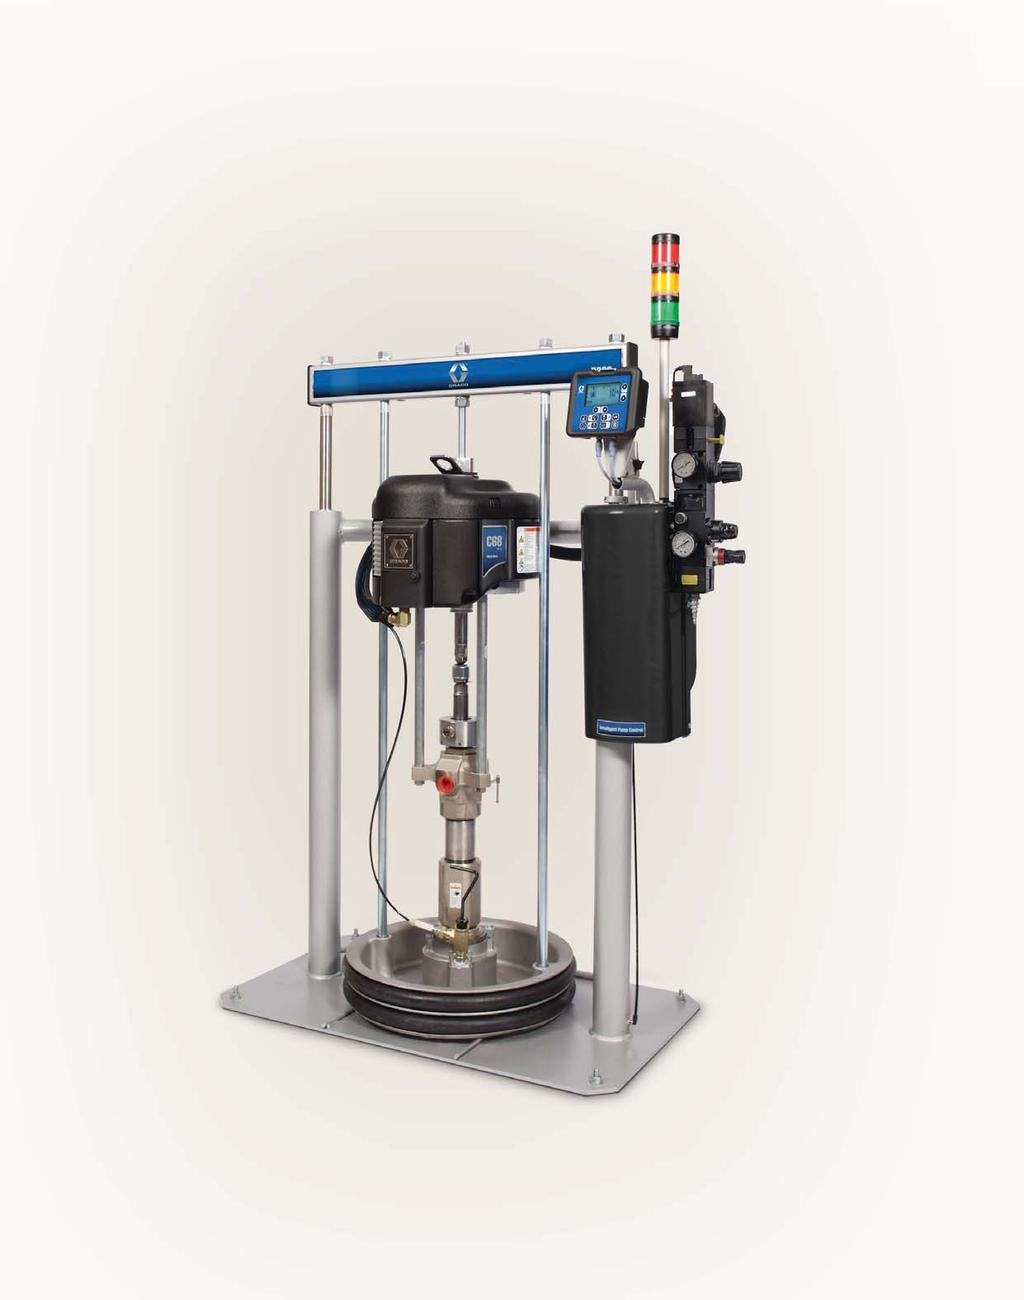 Graco Supply Systems with NXT Technology Discover the next generation of technology and performance Graco Supply Systems can help maximize your plant s production capacity with innovative features,